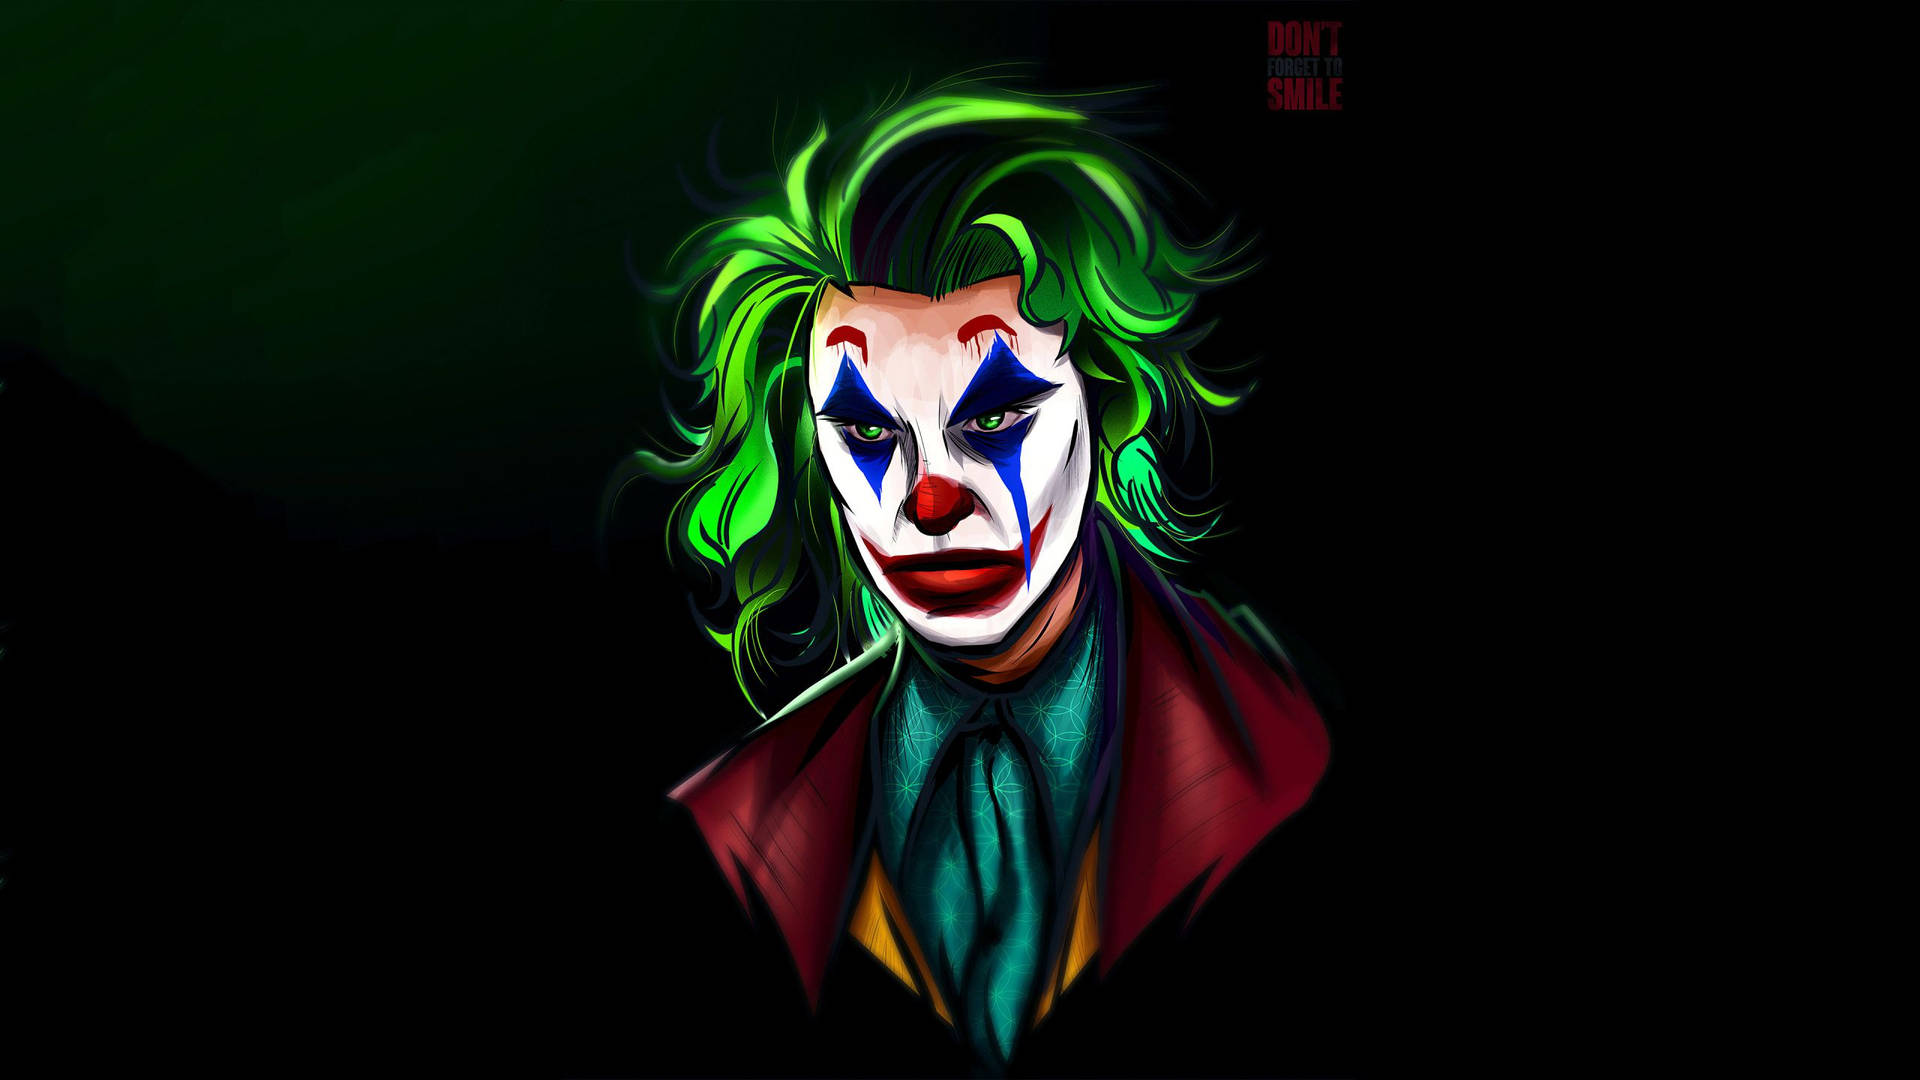 “a Laugh A Minute - The Joker Takes On Pubg” Background